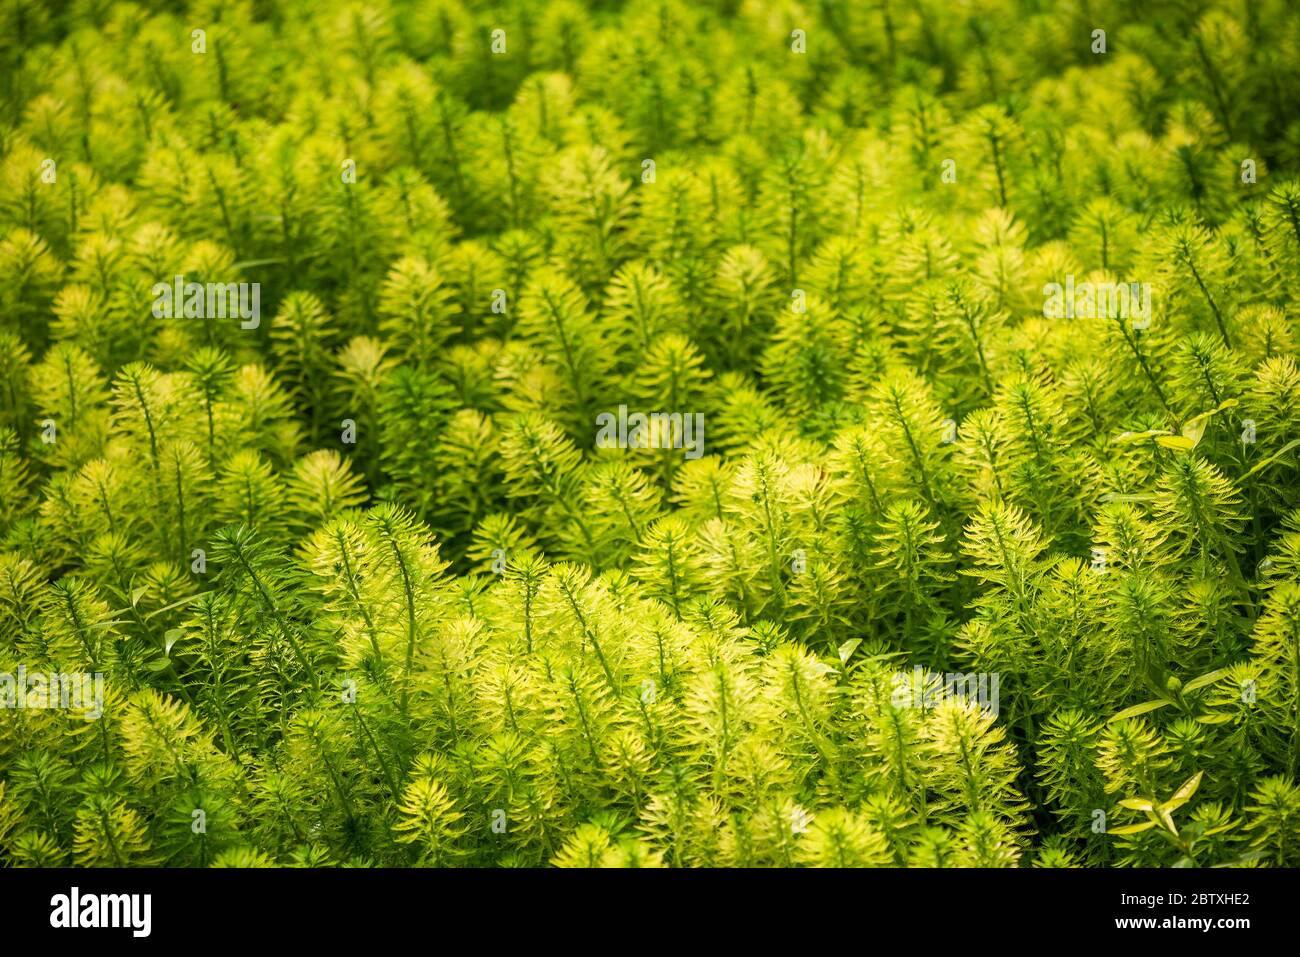 Eucalyptus and Parrot's feather - Myriophyllum aquaticum - green leaves close-up view in a pond in Chengdu, Sichuan province, China Stock Photo